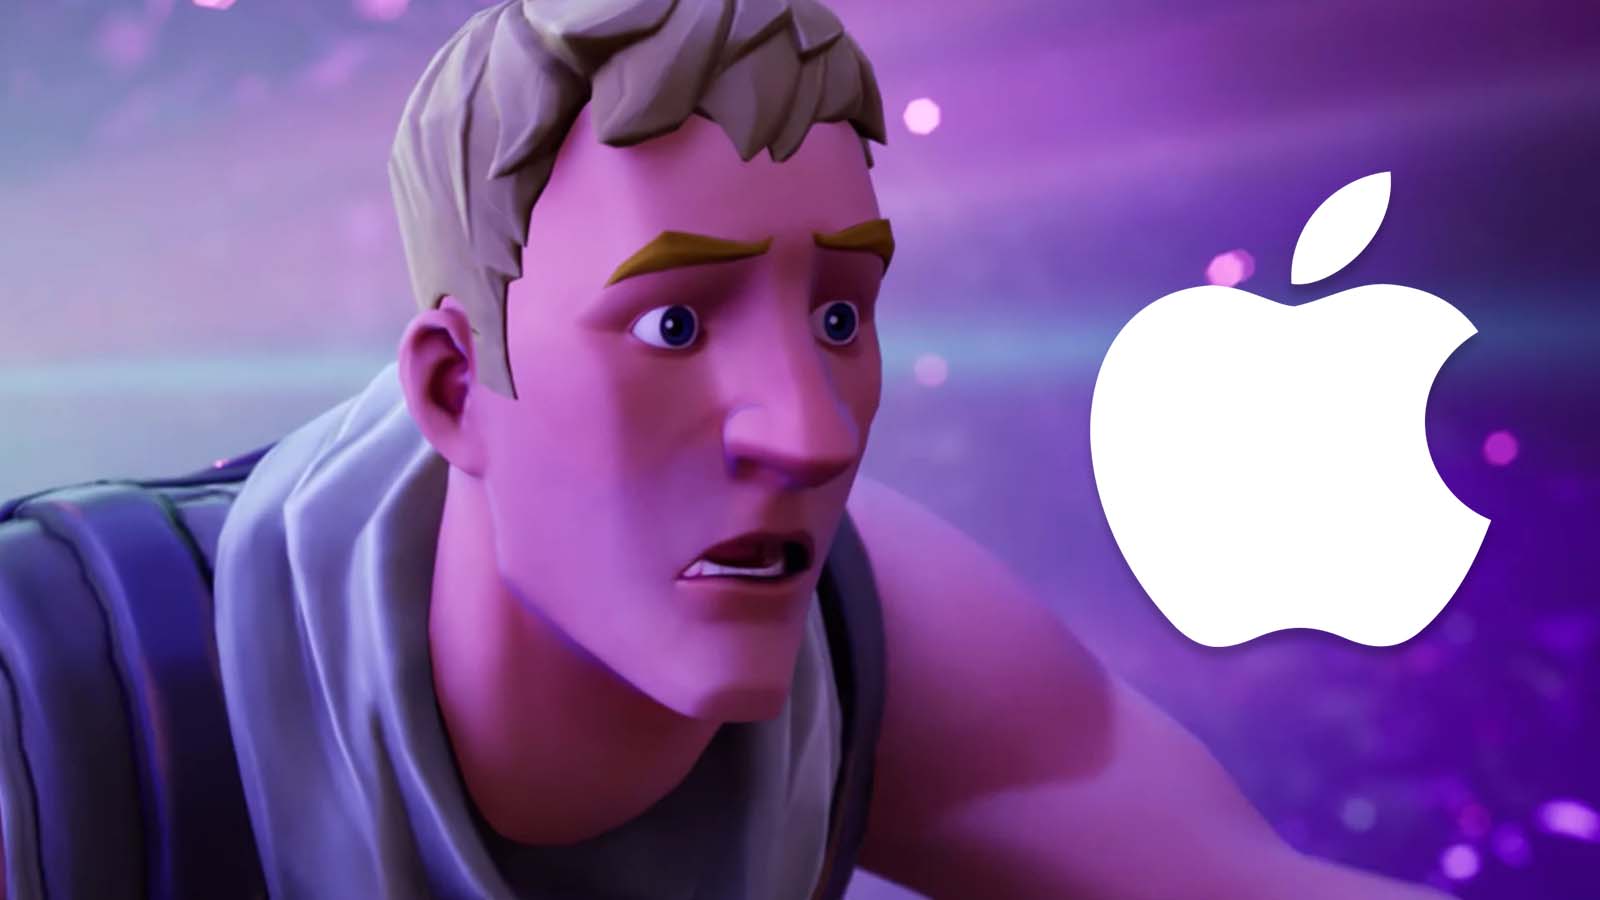 Apple 'wins' Fortnite lawsuit against Epic, but must reform their in-app purchases policy